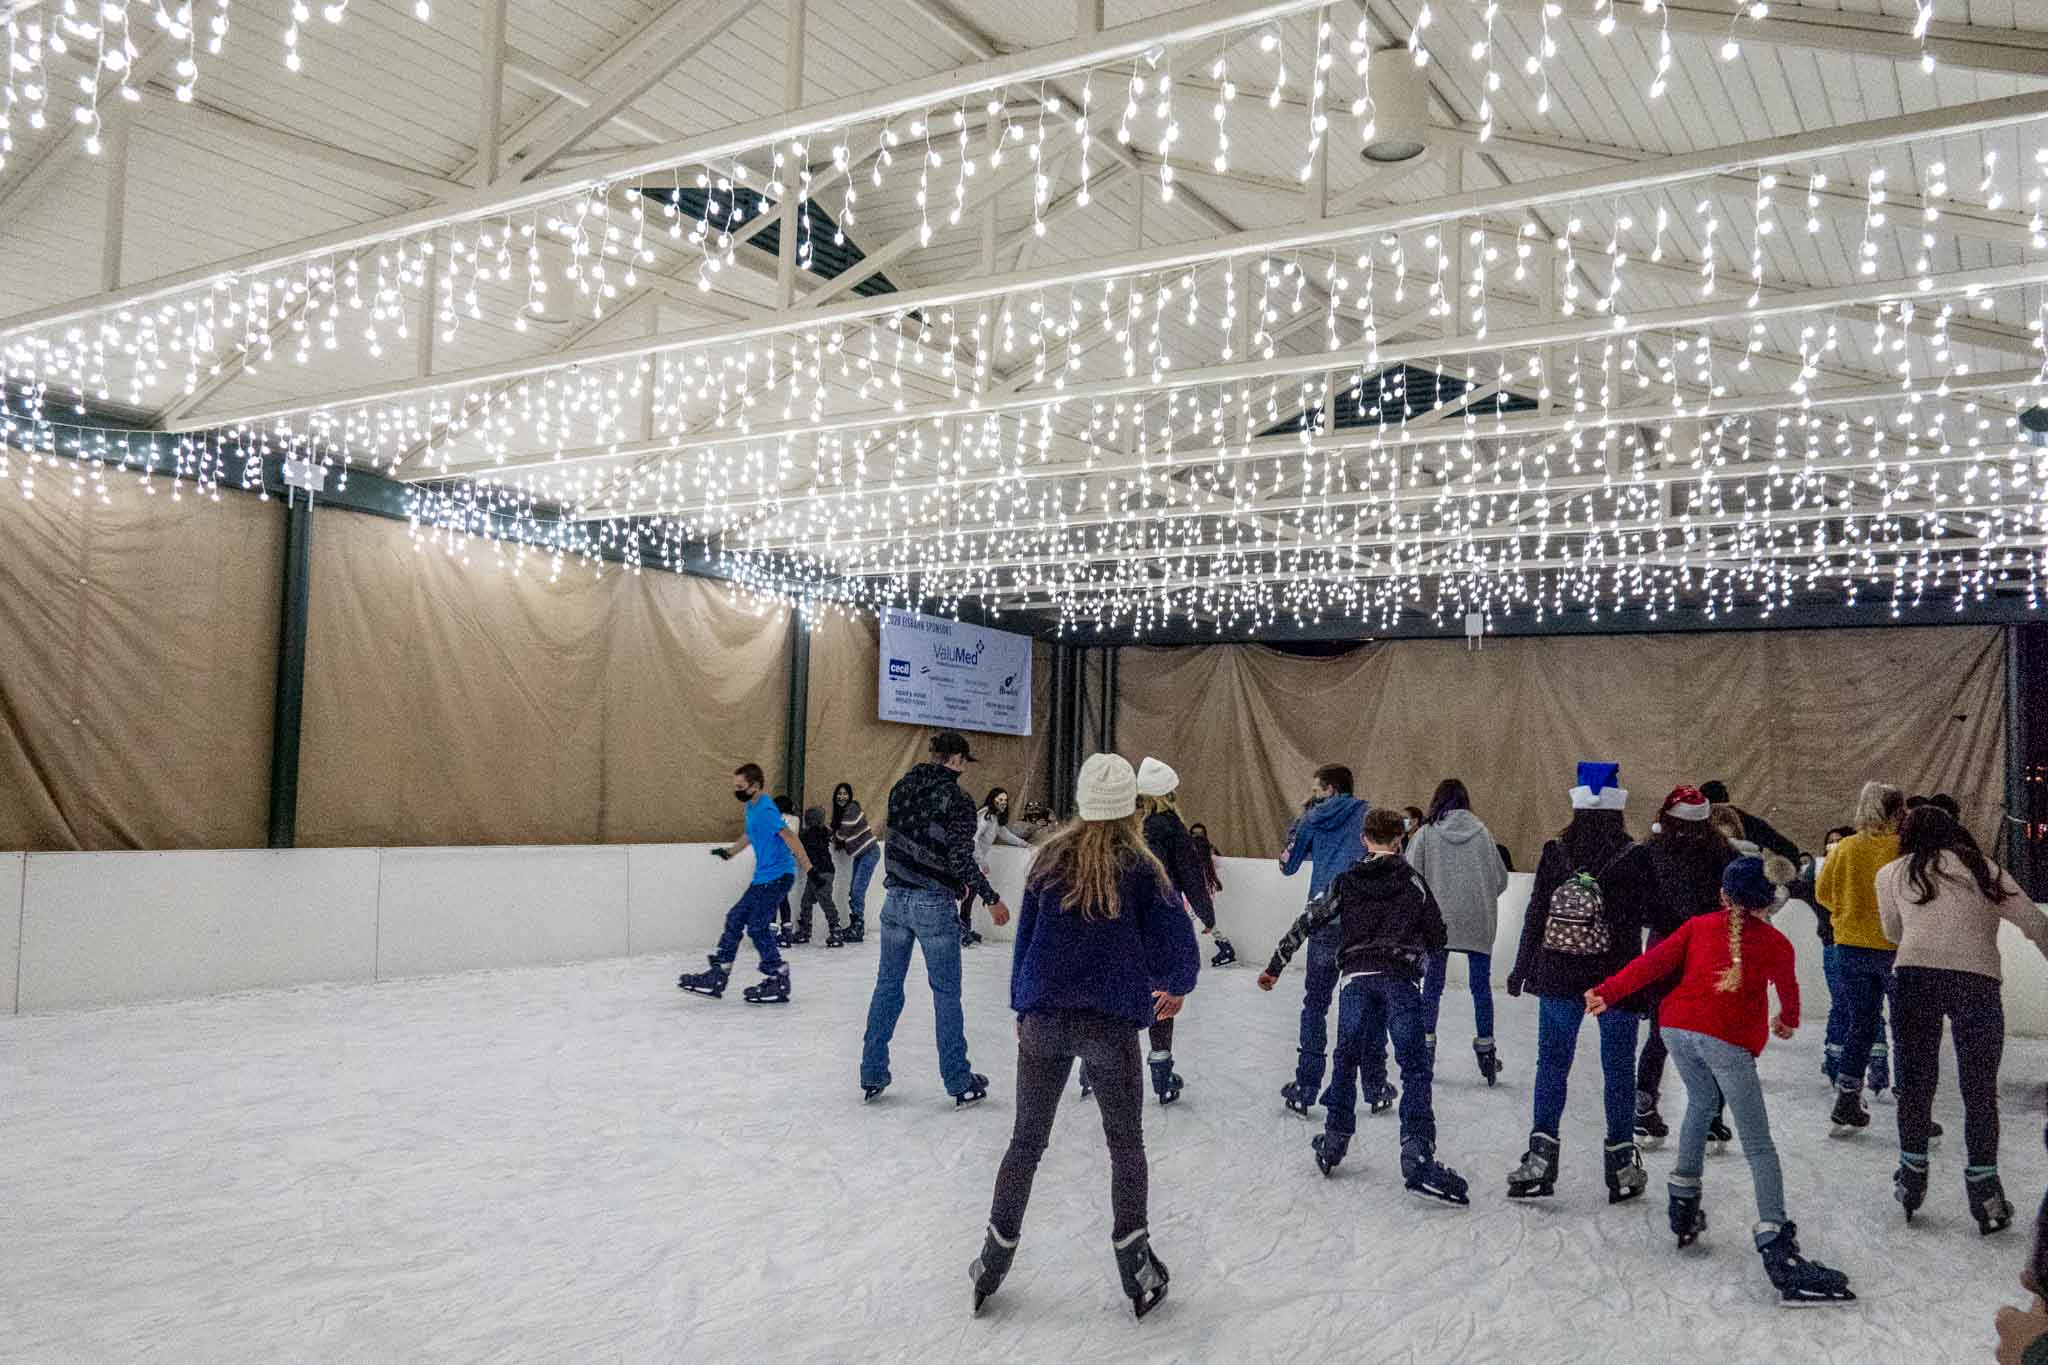 Children skating on an ice skating rink decorated with white lights